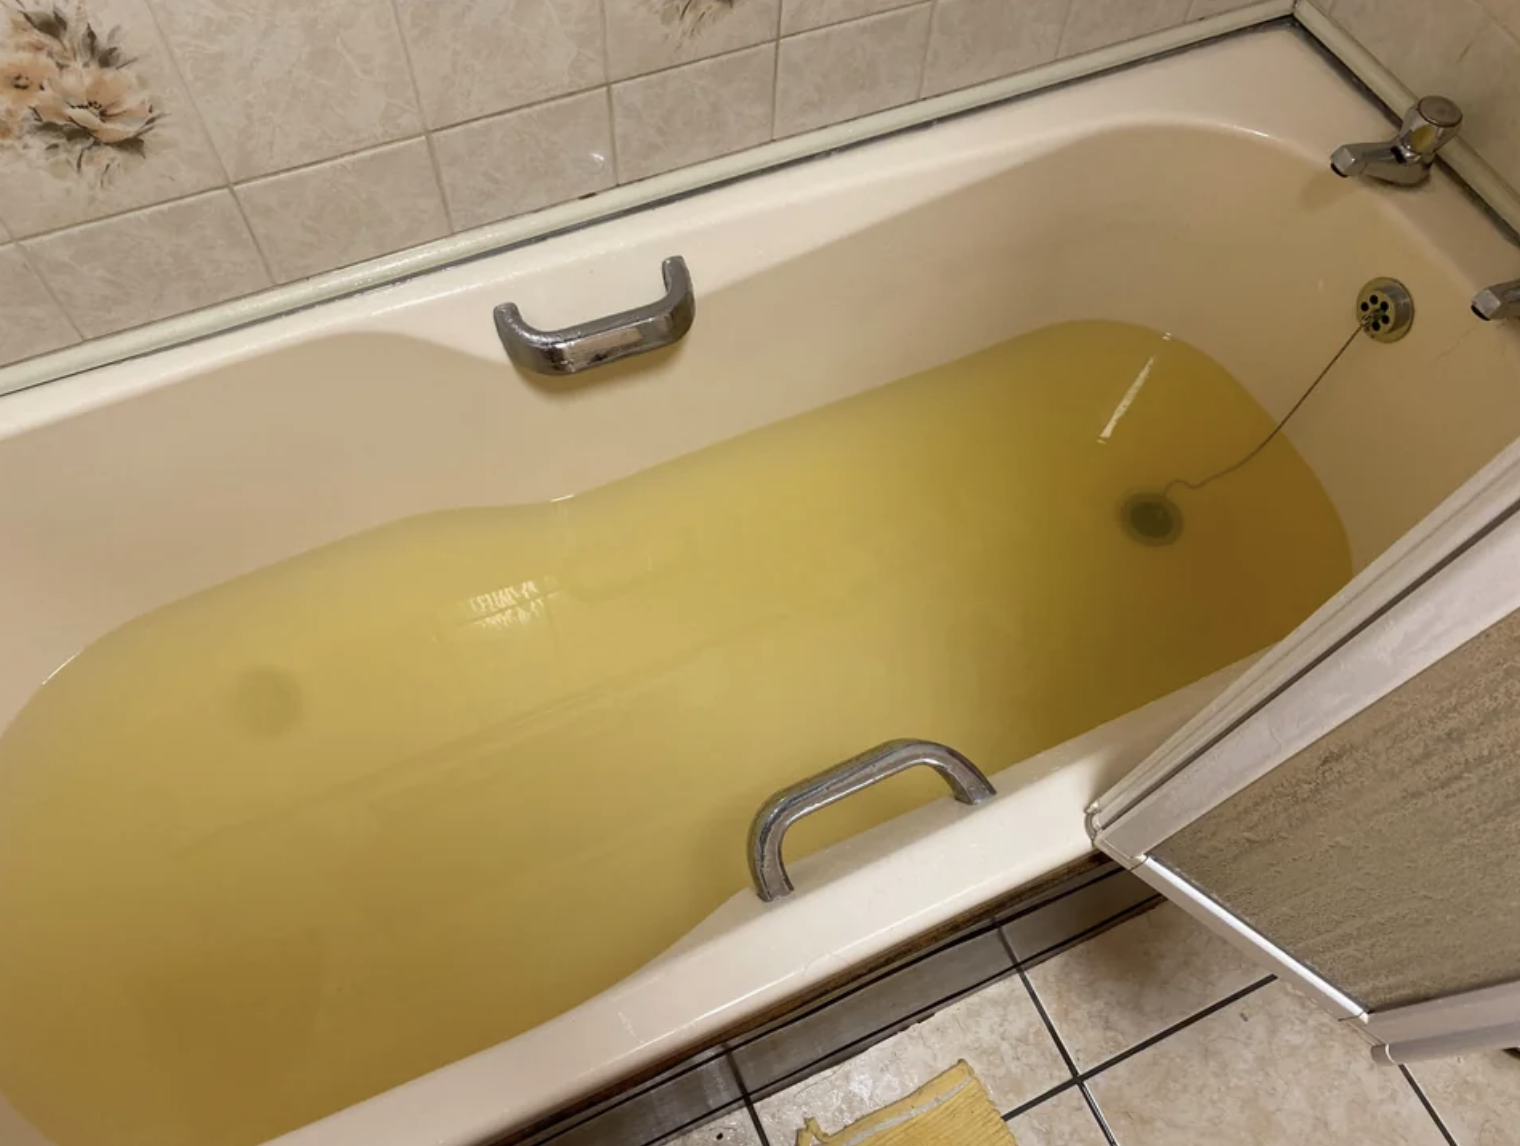 An ankle deep layer of yellow stagnant water is sitting in the bathtub